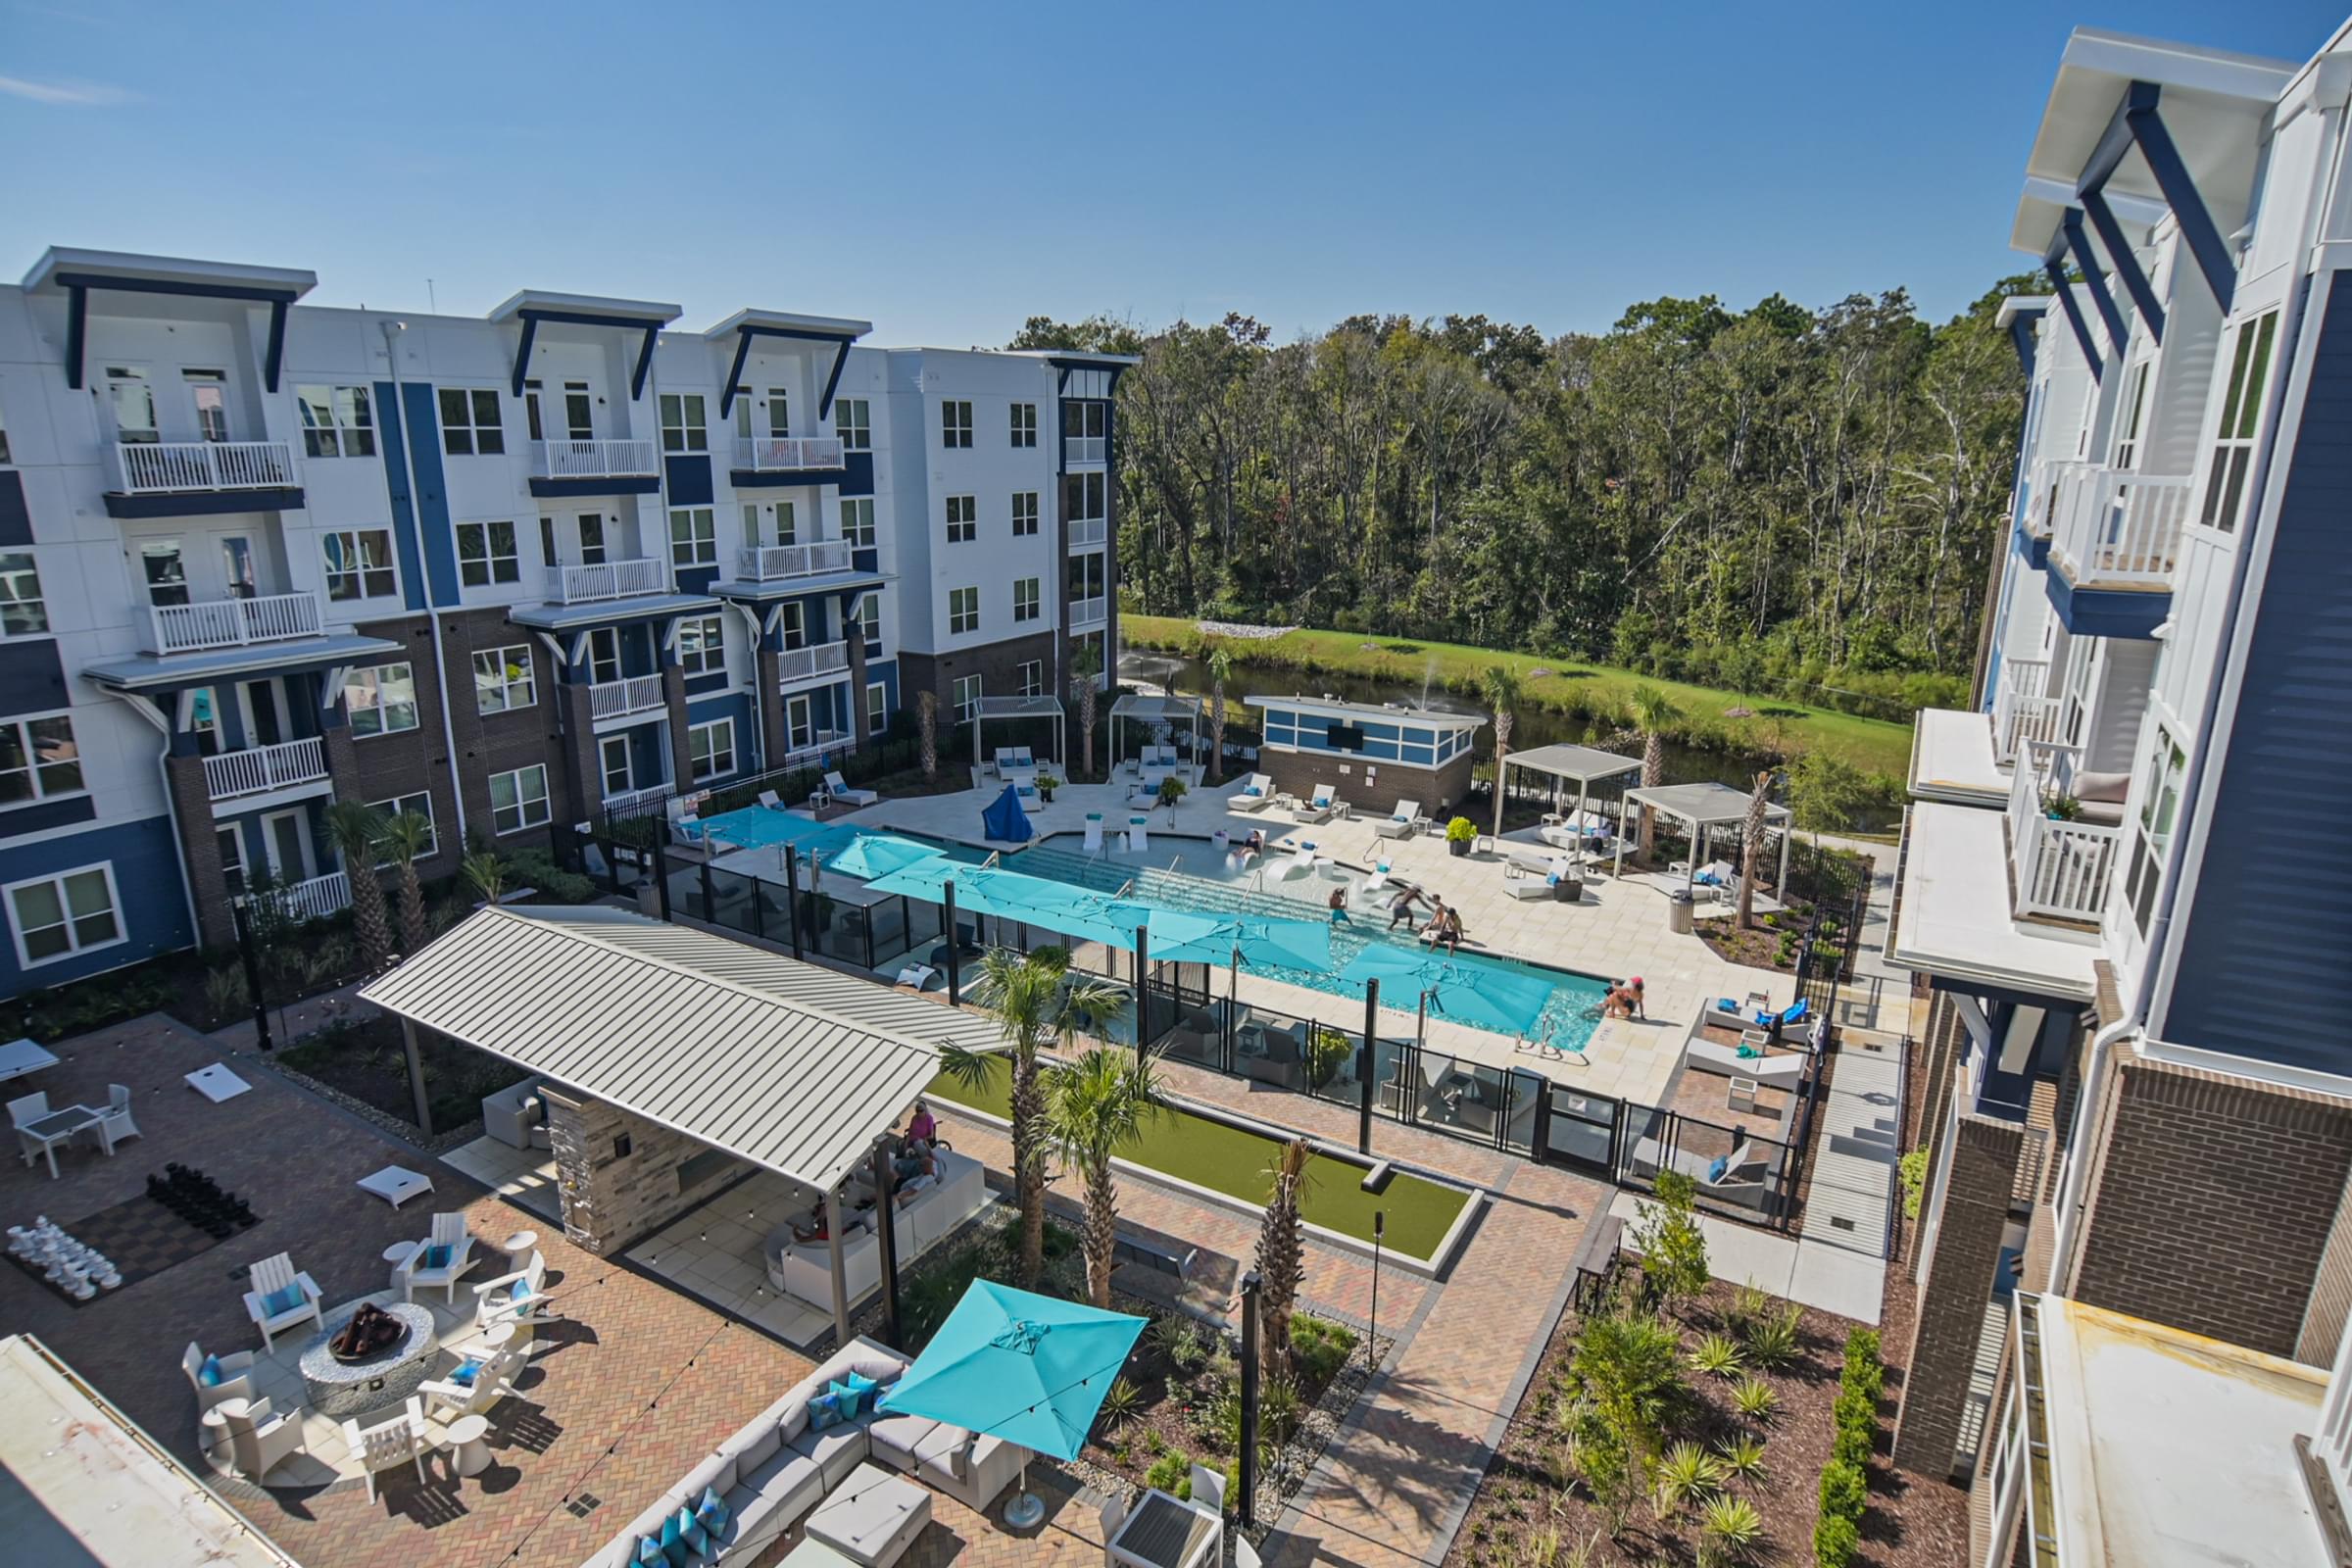 Patio Views from Hawthorne at Indy West in Wilmington, NC